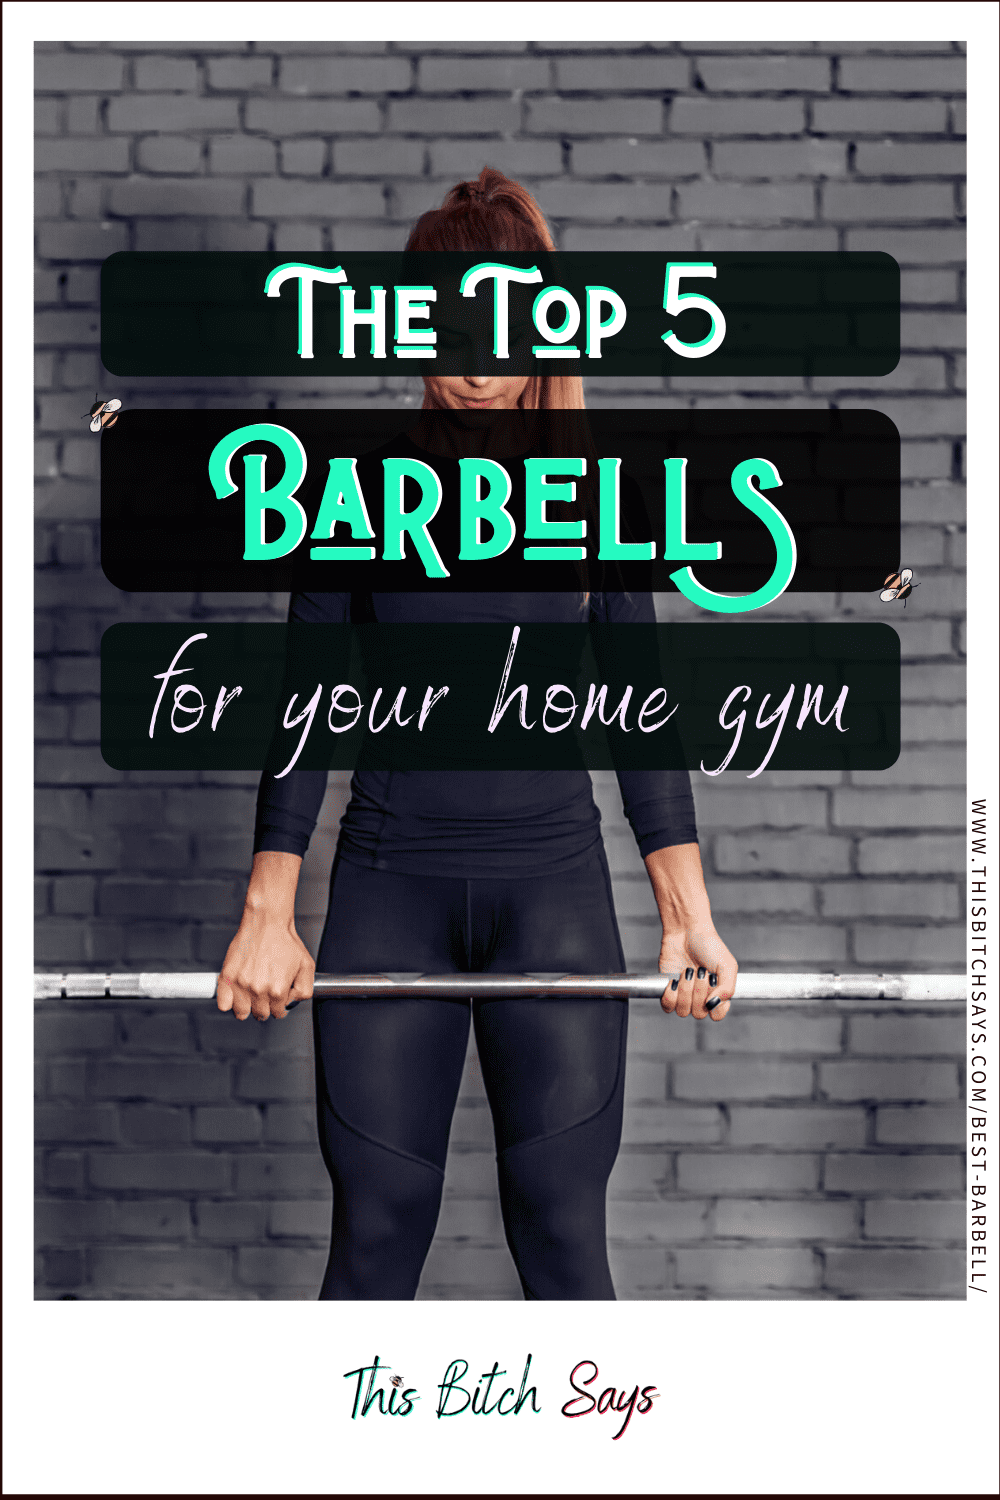 For Your Home: The Top 5 barbells for your home gym.